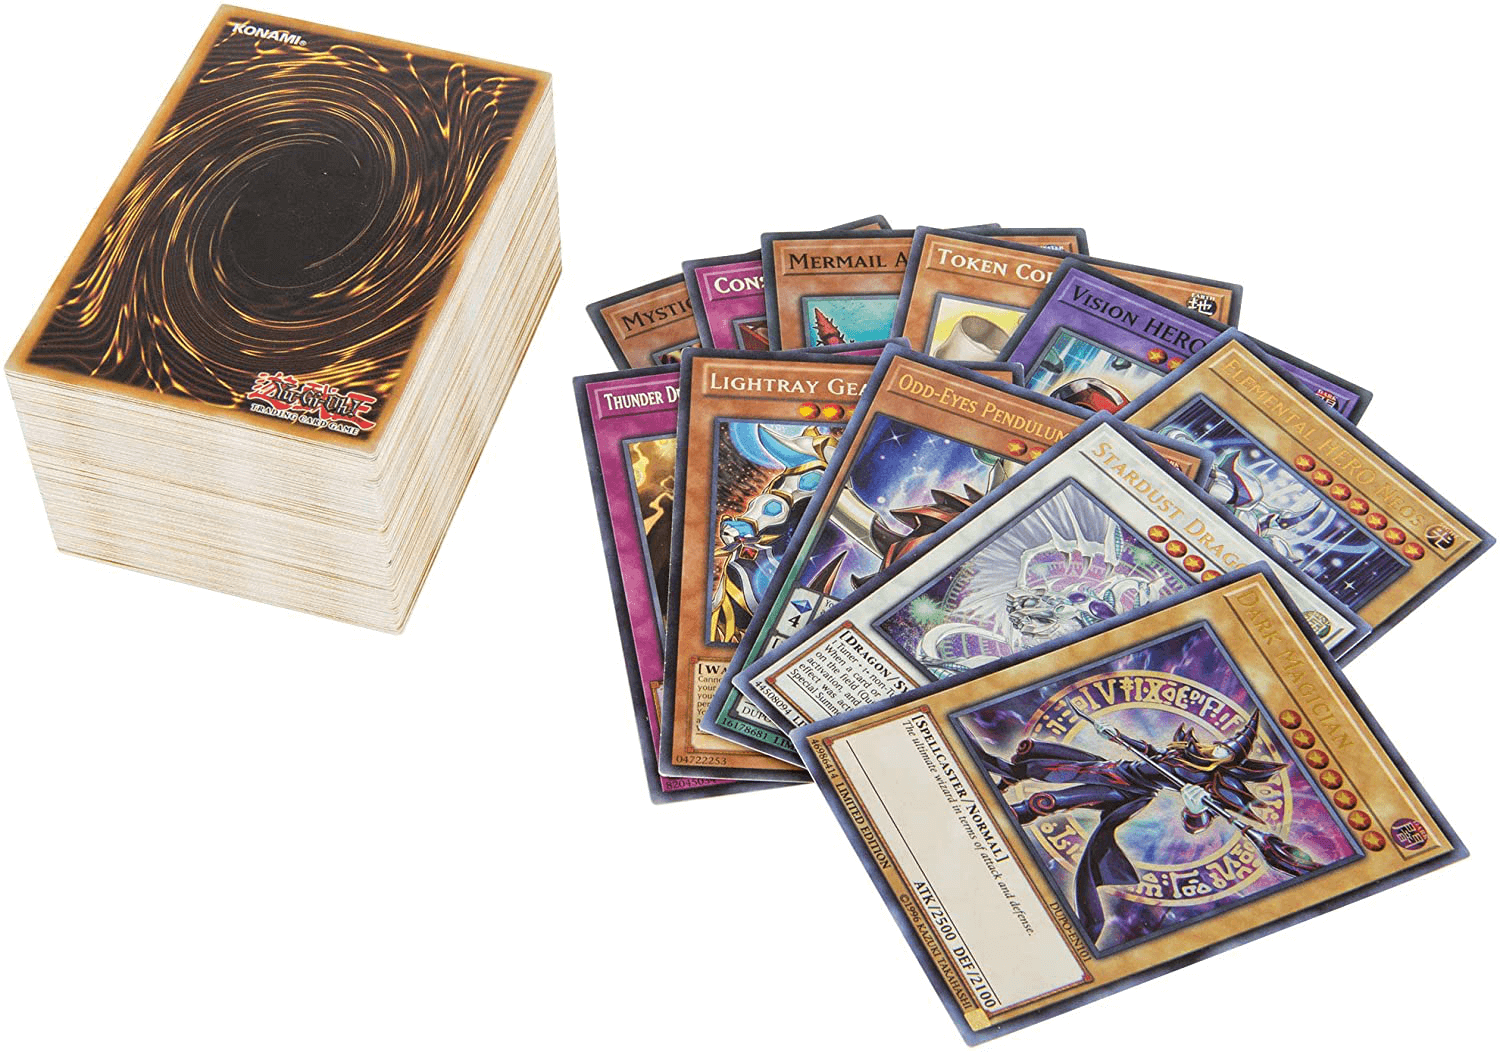 Yu-Gi-Oh! deck of cards with some cards visible